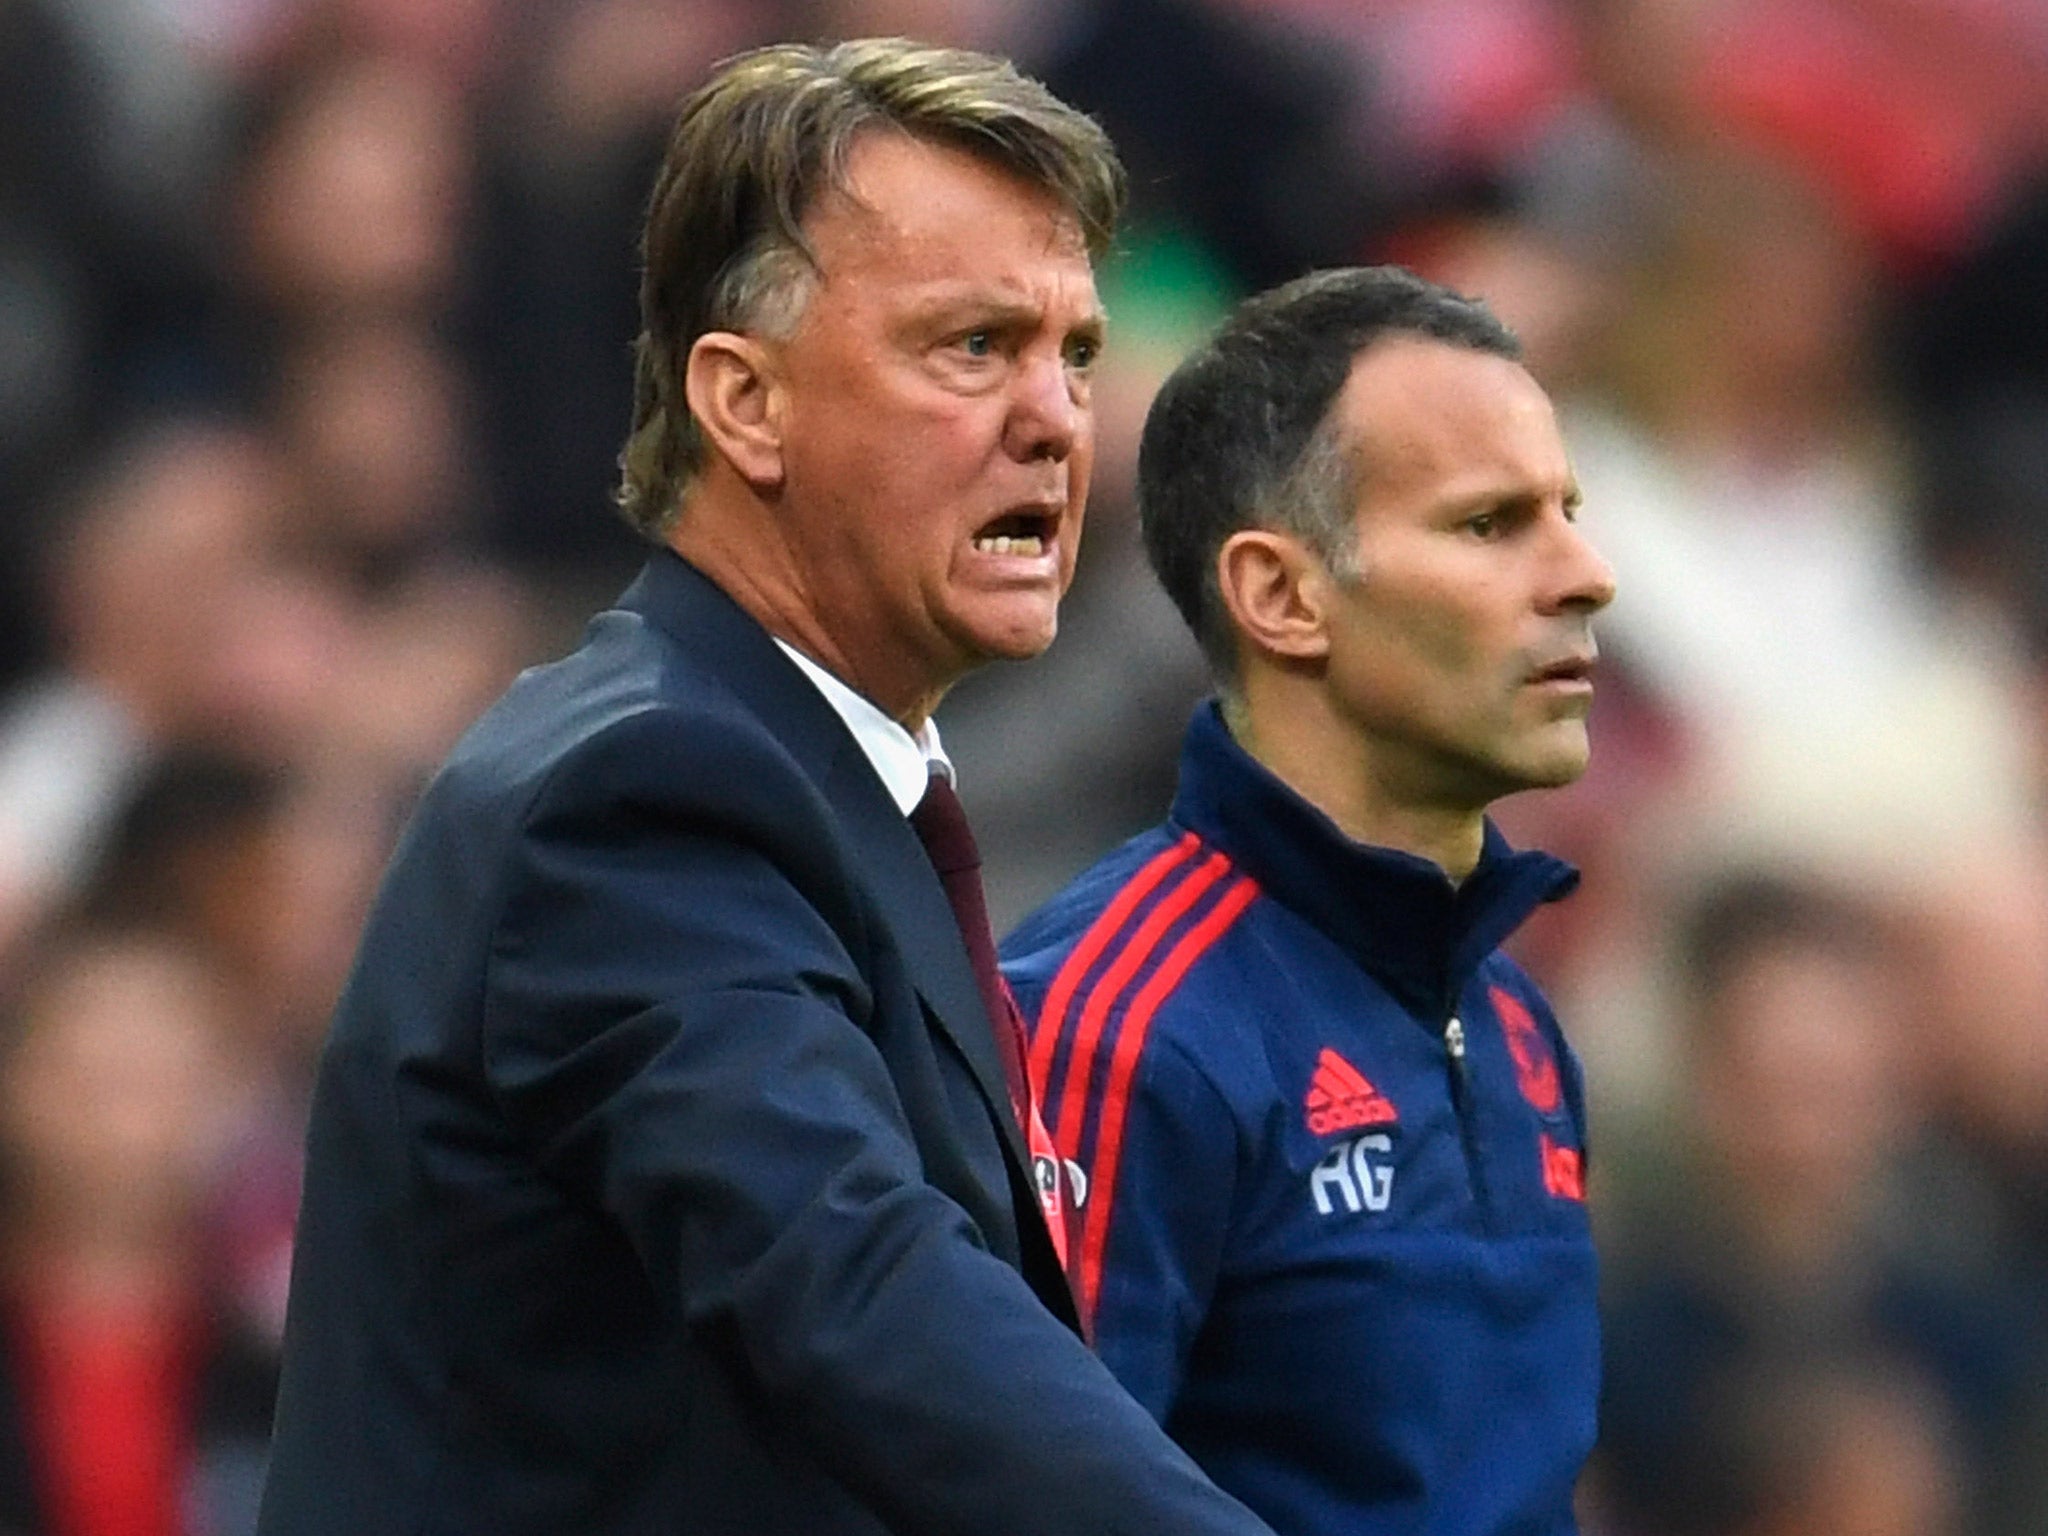 Louis van Gaal is said to be 'furious' with Manchester United's handling of his impending dismissal